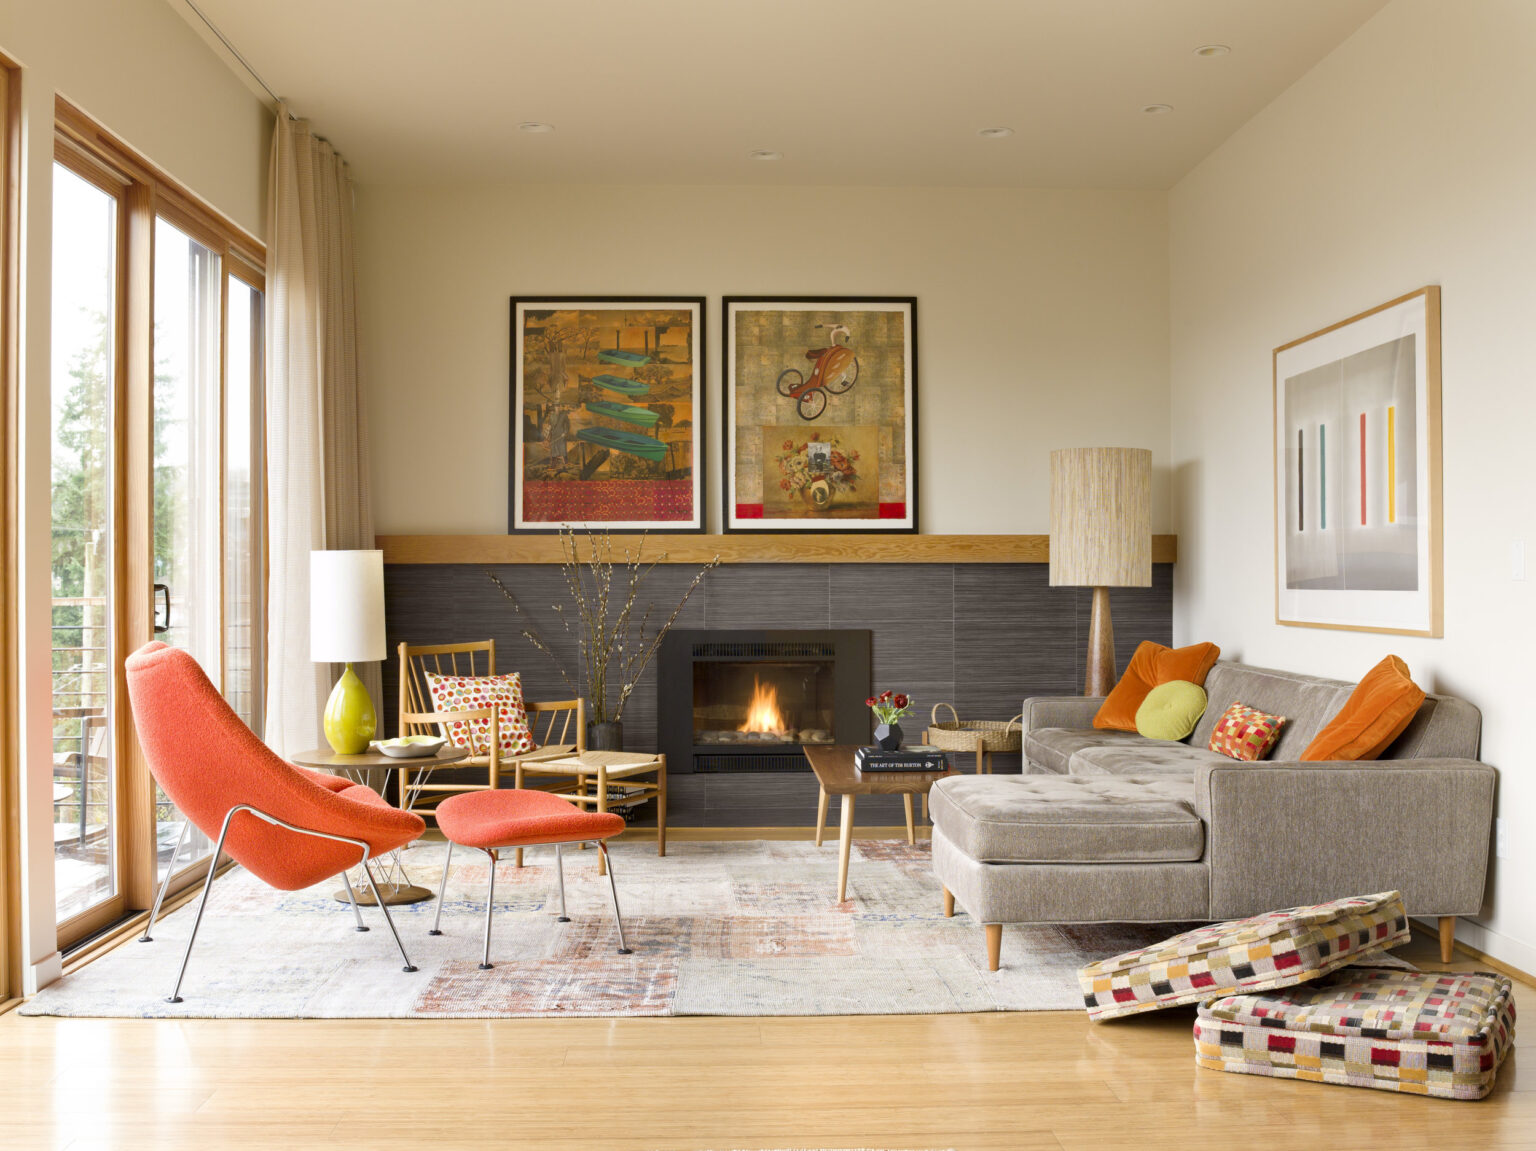 8 Inspiring MCM Living Rooms from Around the Web - Atomic Ranch